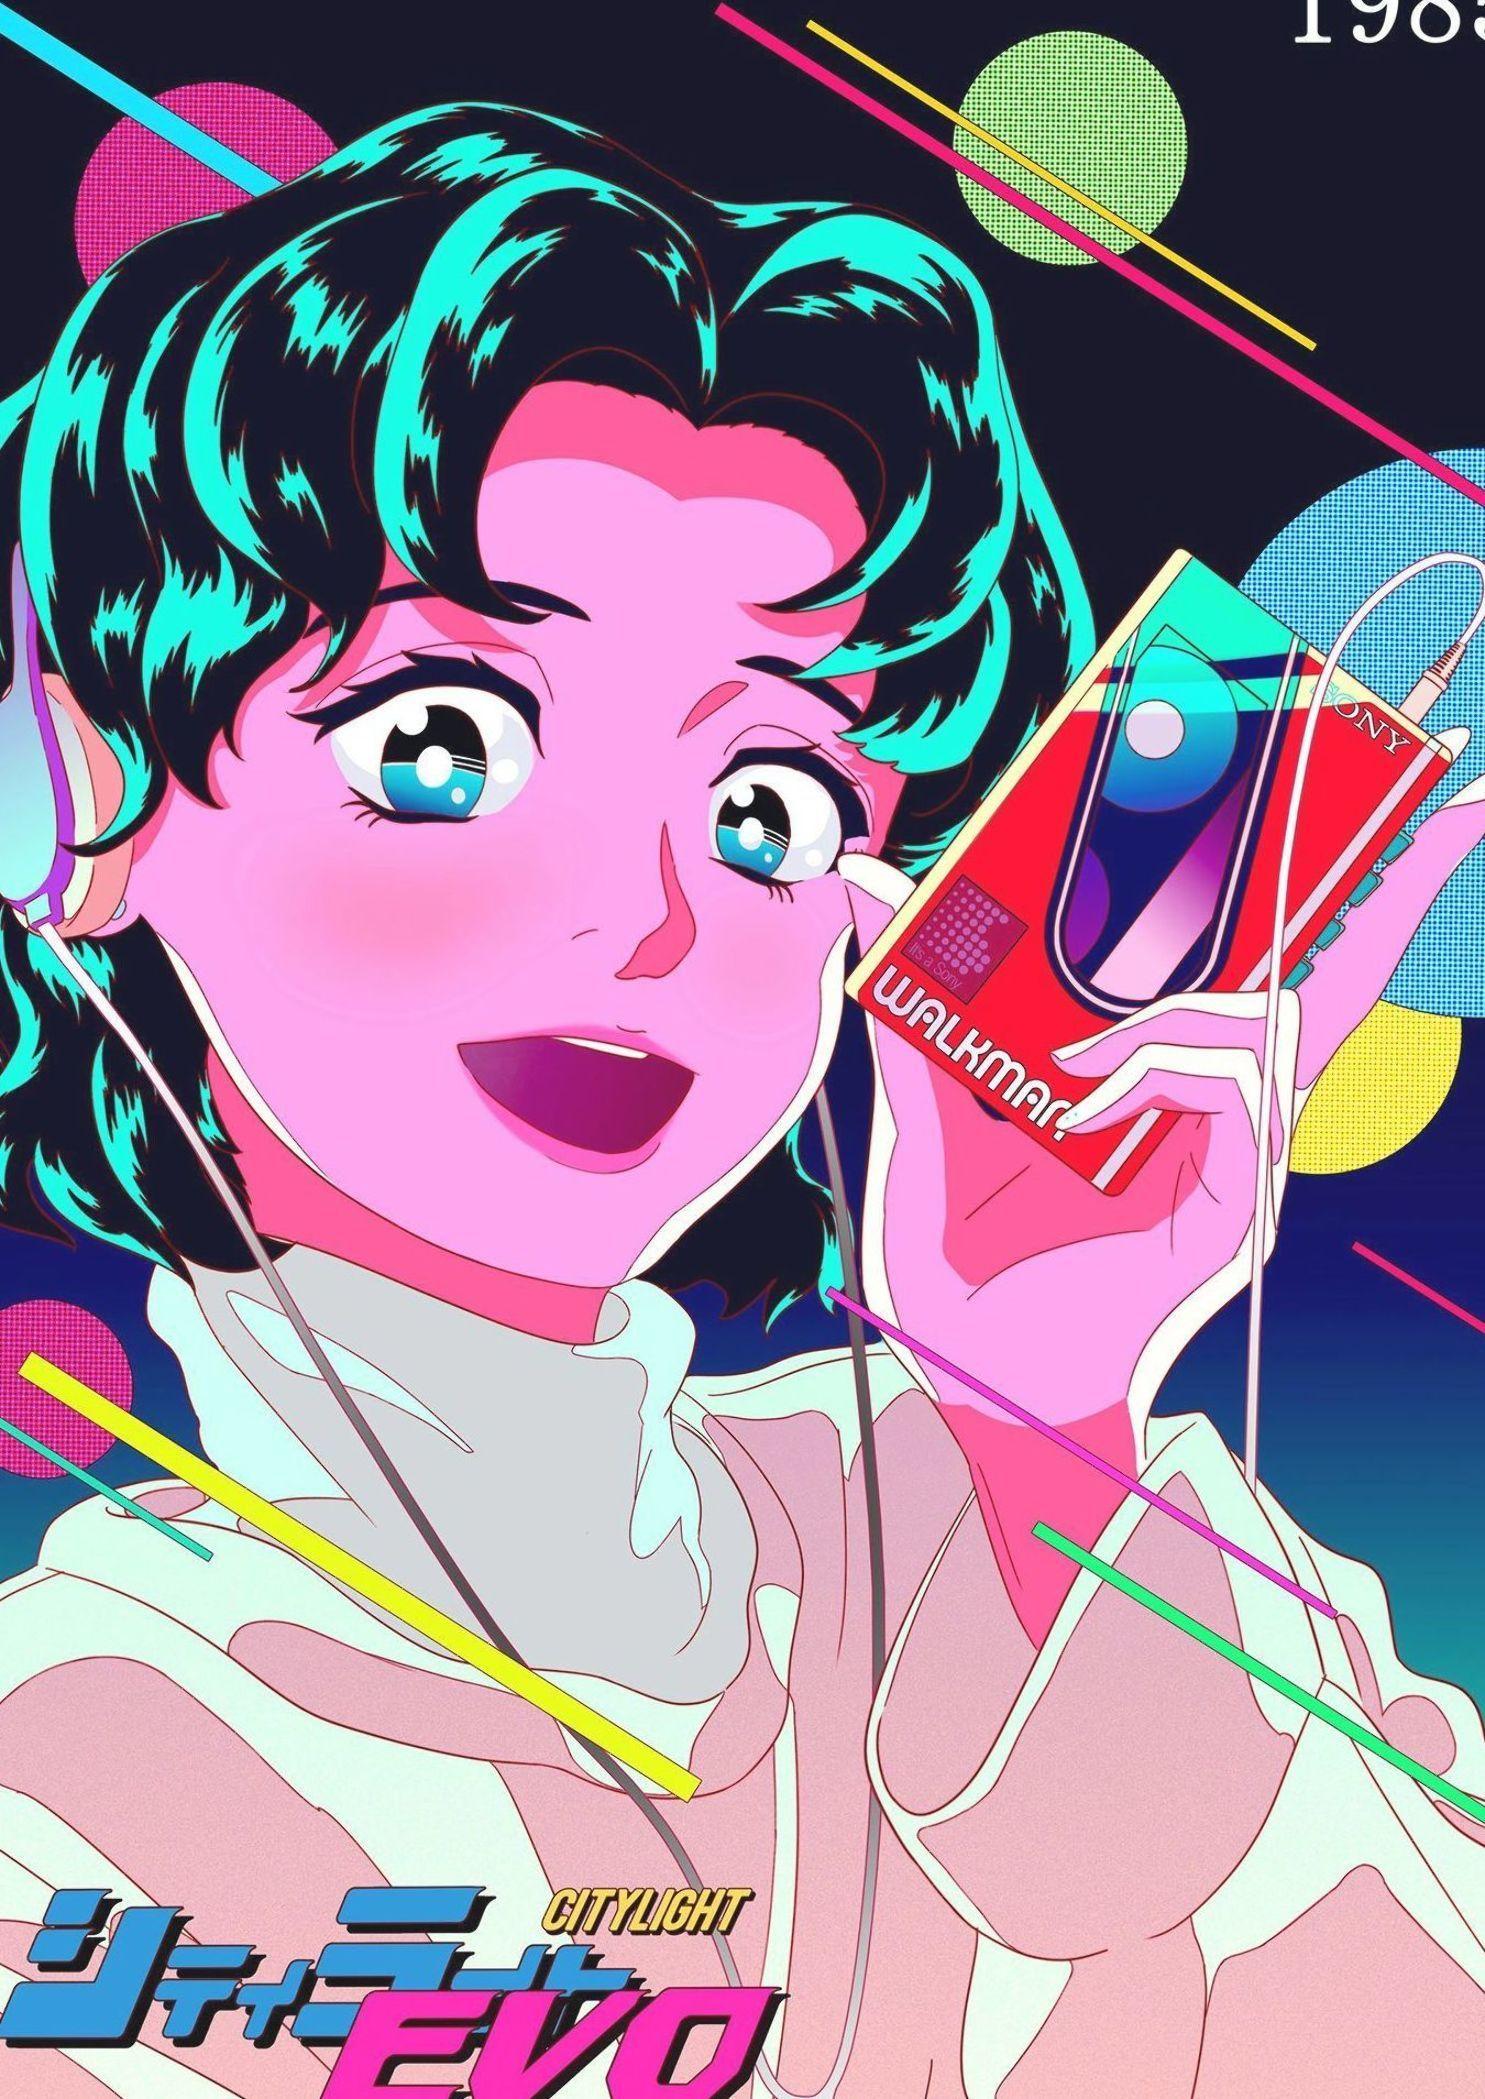 Future Funk Monthly Mix  August 2020  Future Funk Monthly